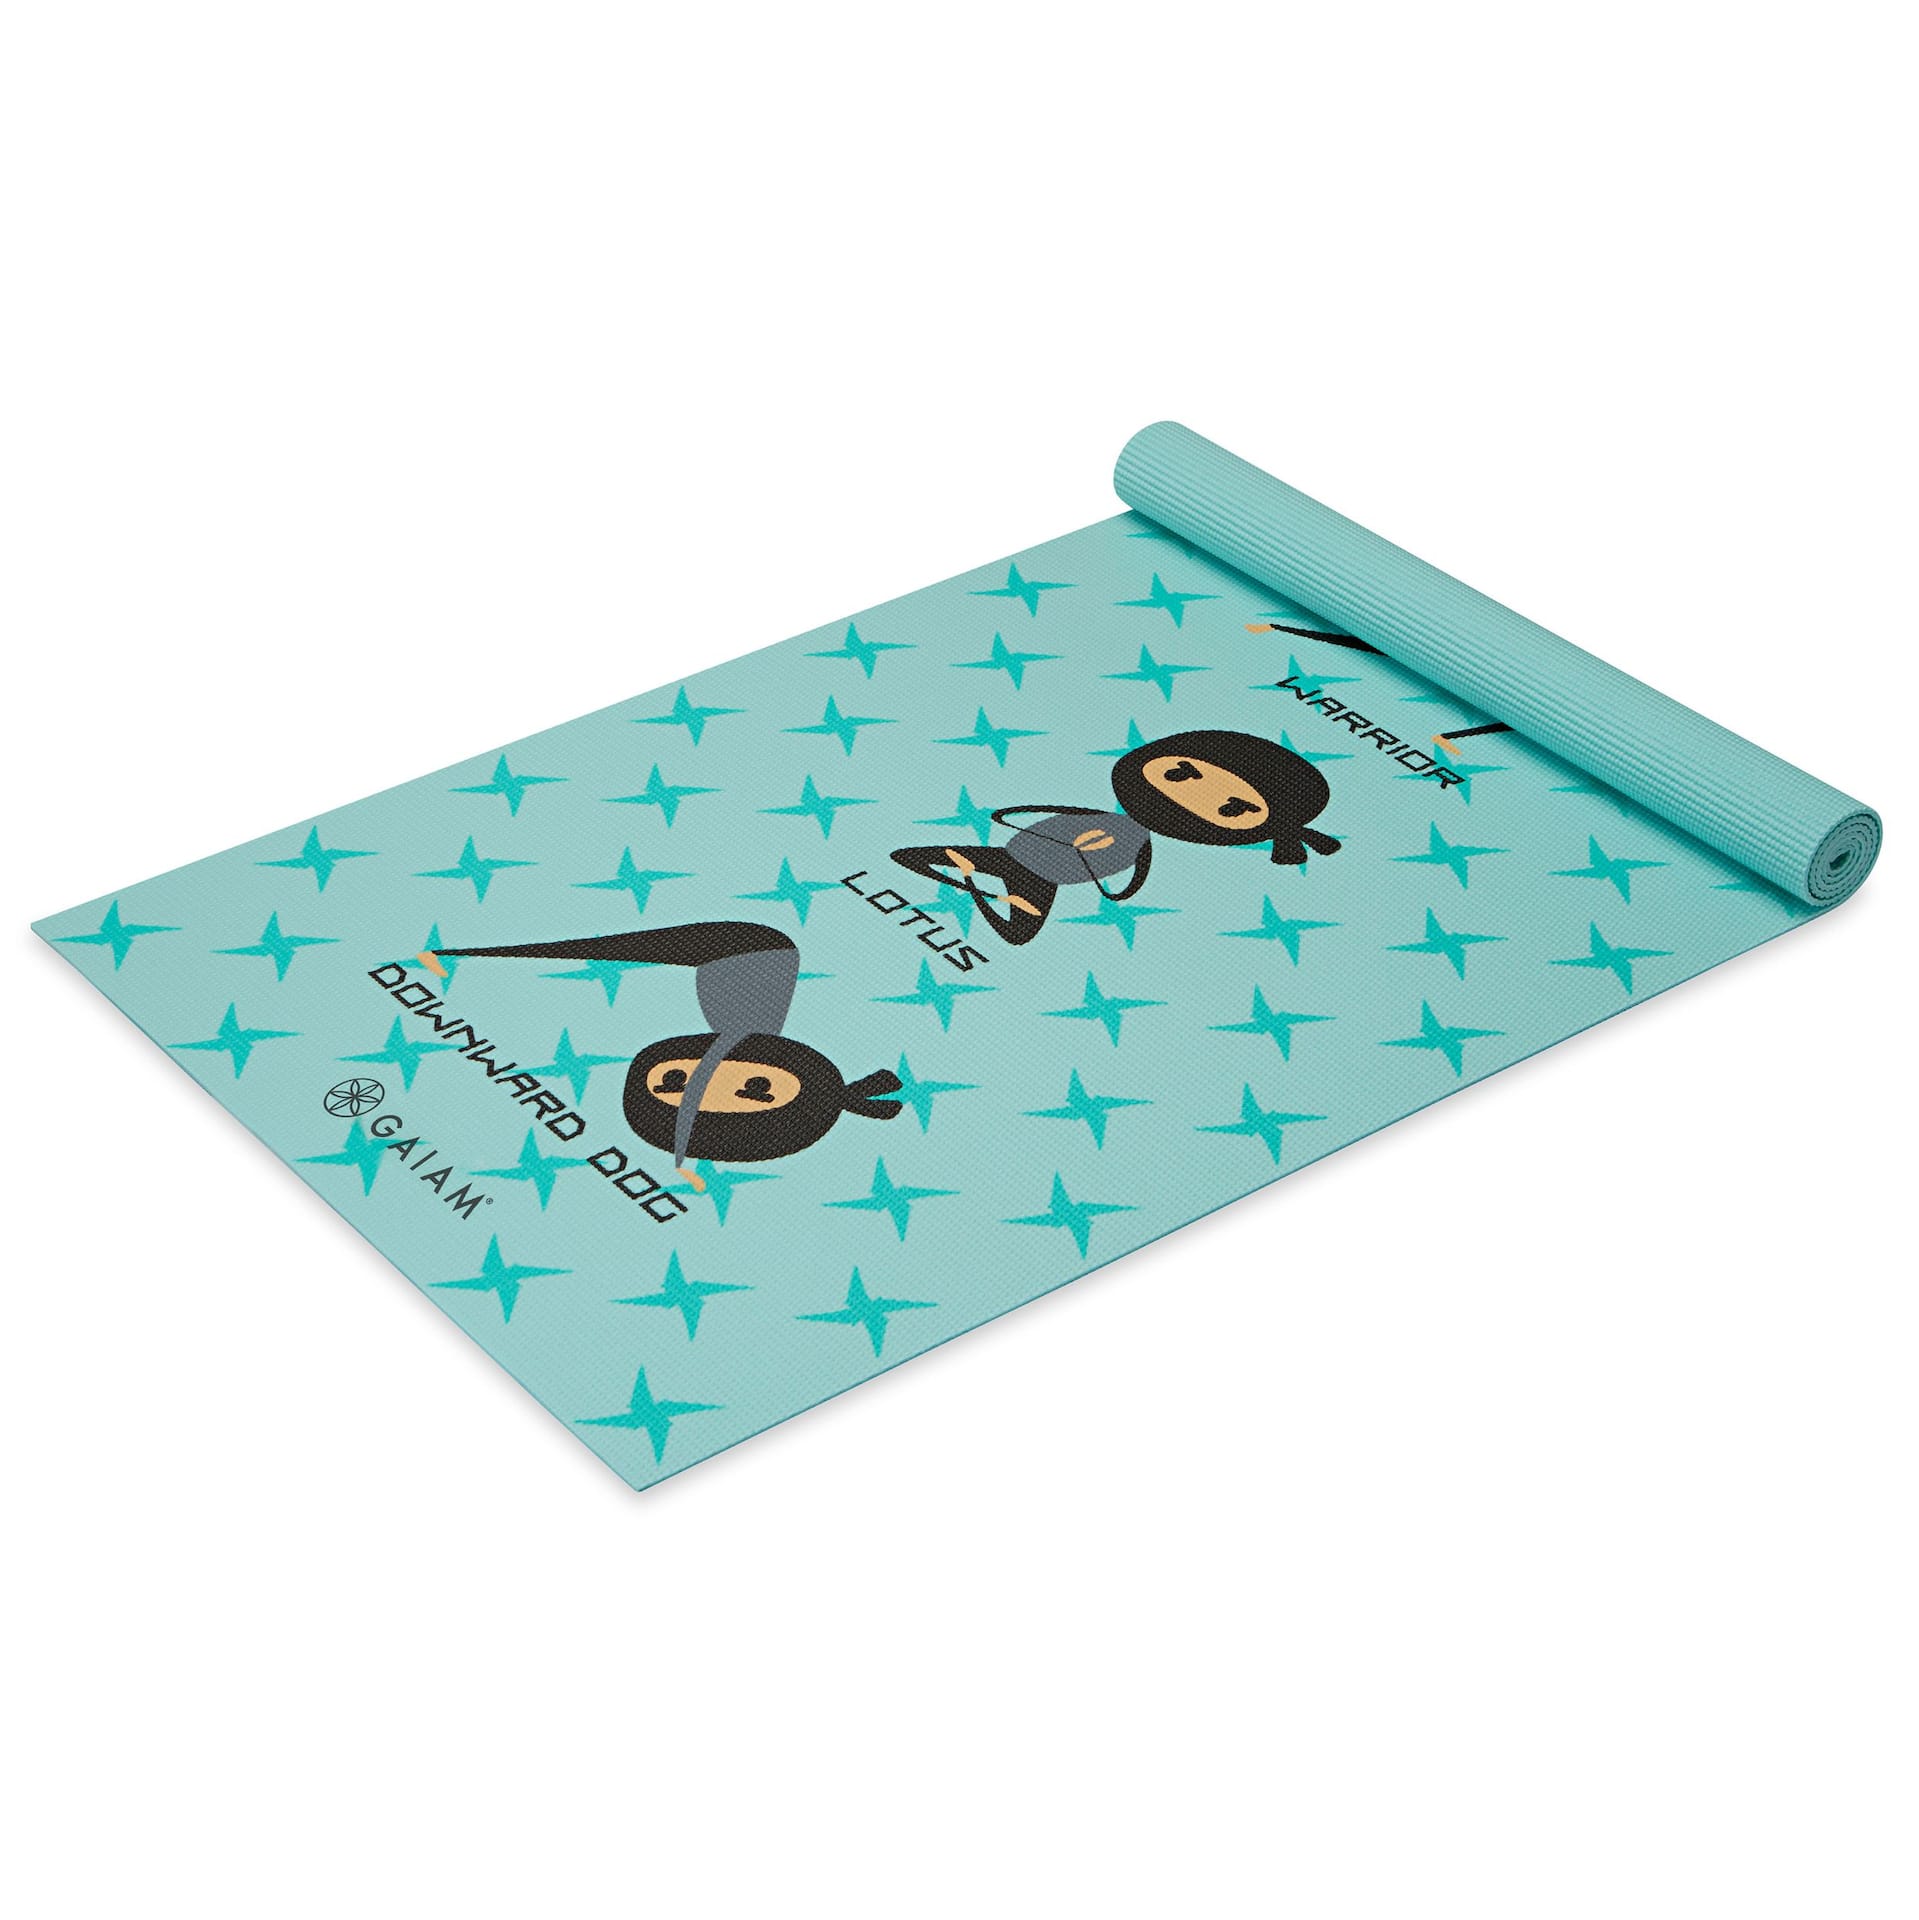 https://media-www.canadiantire.ca/product/playing/exercise/exercise-accessories/1841269/gaiam-kids-yoga-mat-ninja-b2557c22-40f8-44d8-a54b-9ef526cbff7c-jpgrendition.jpg